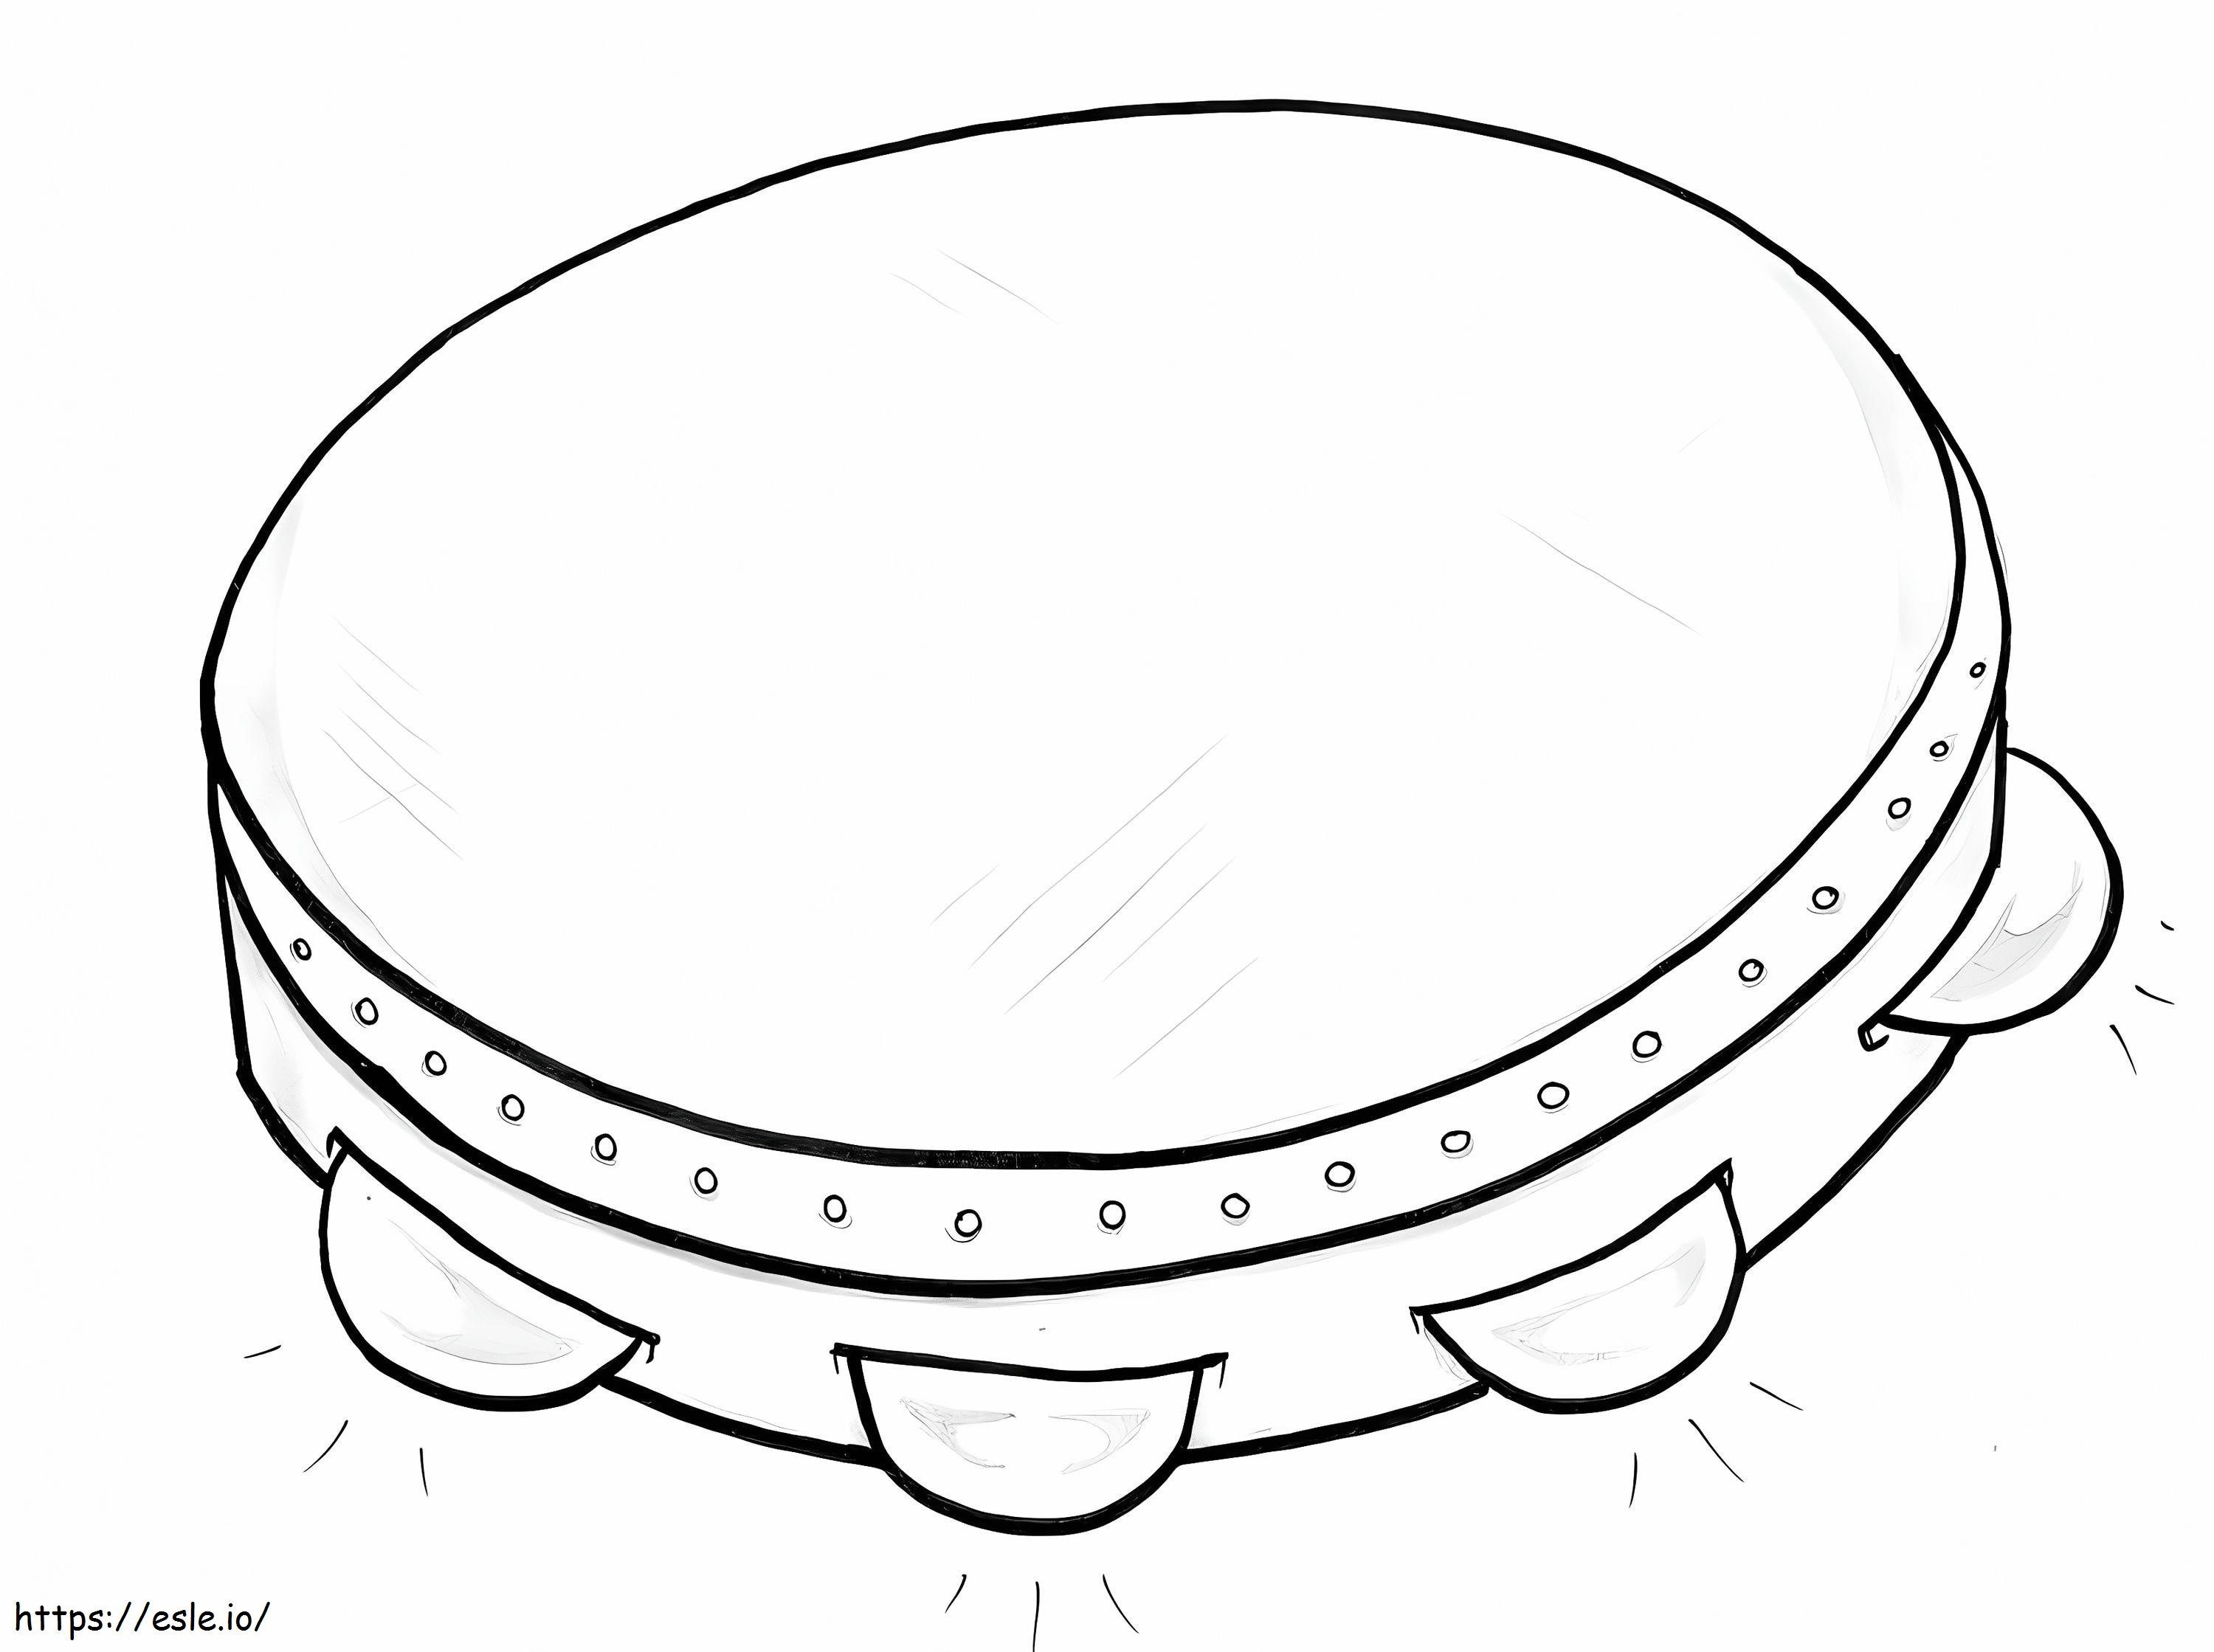 Simple Tambourine 1 coloring page